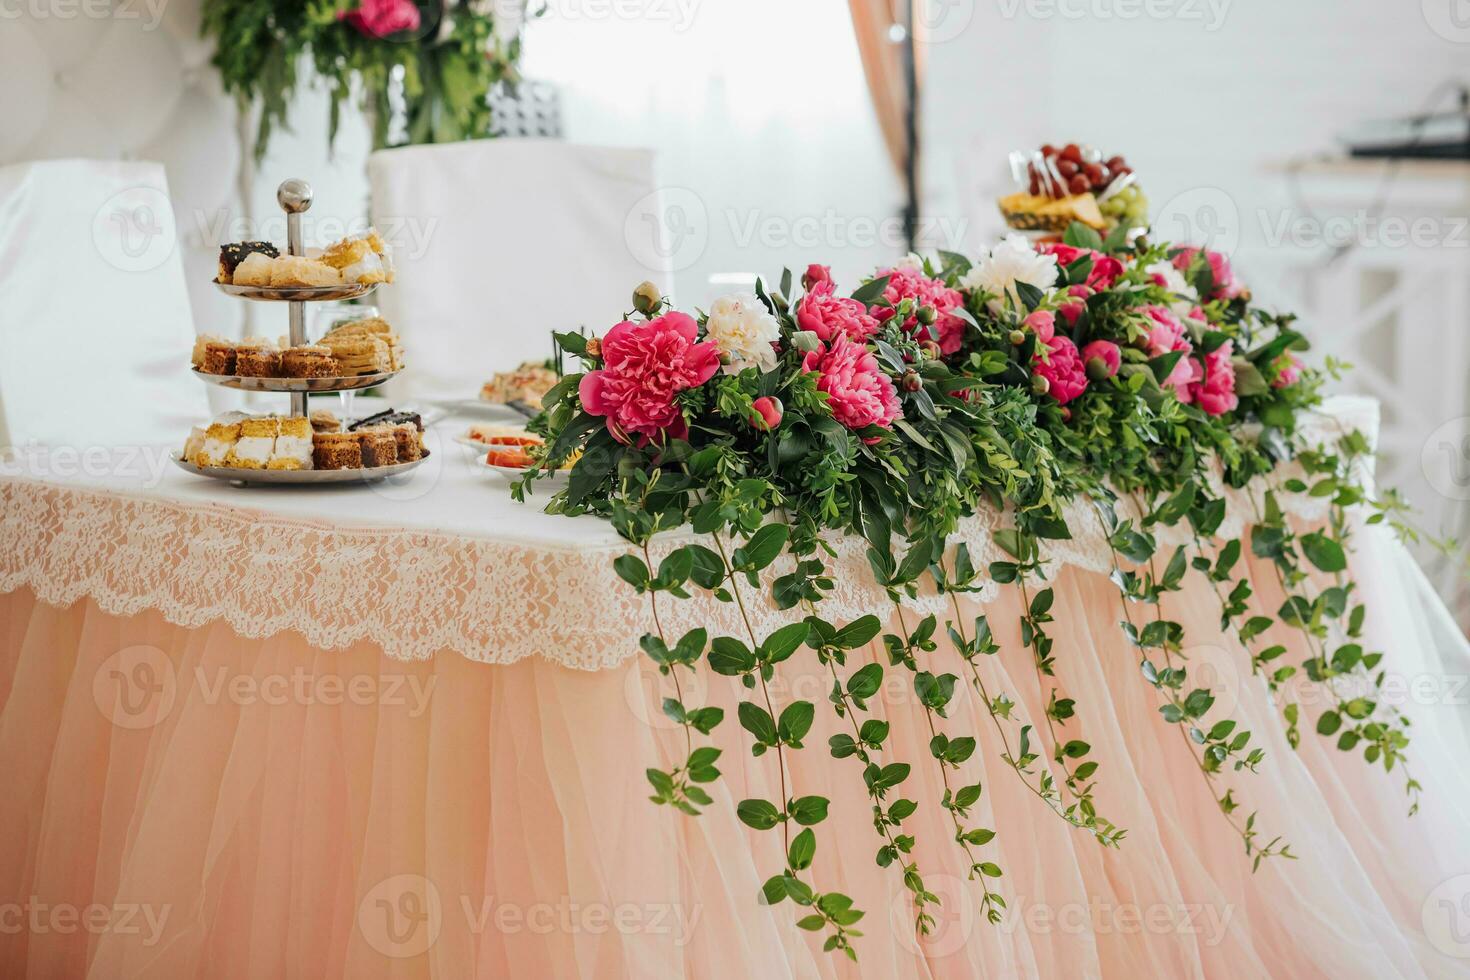 wedding table bride and groom decorated with flowers. Details on a floral arrangement of dried and fresh flowers photo